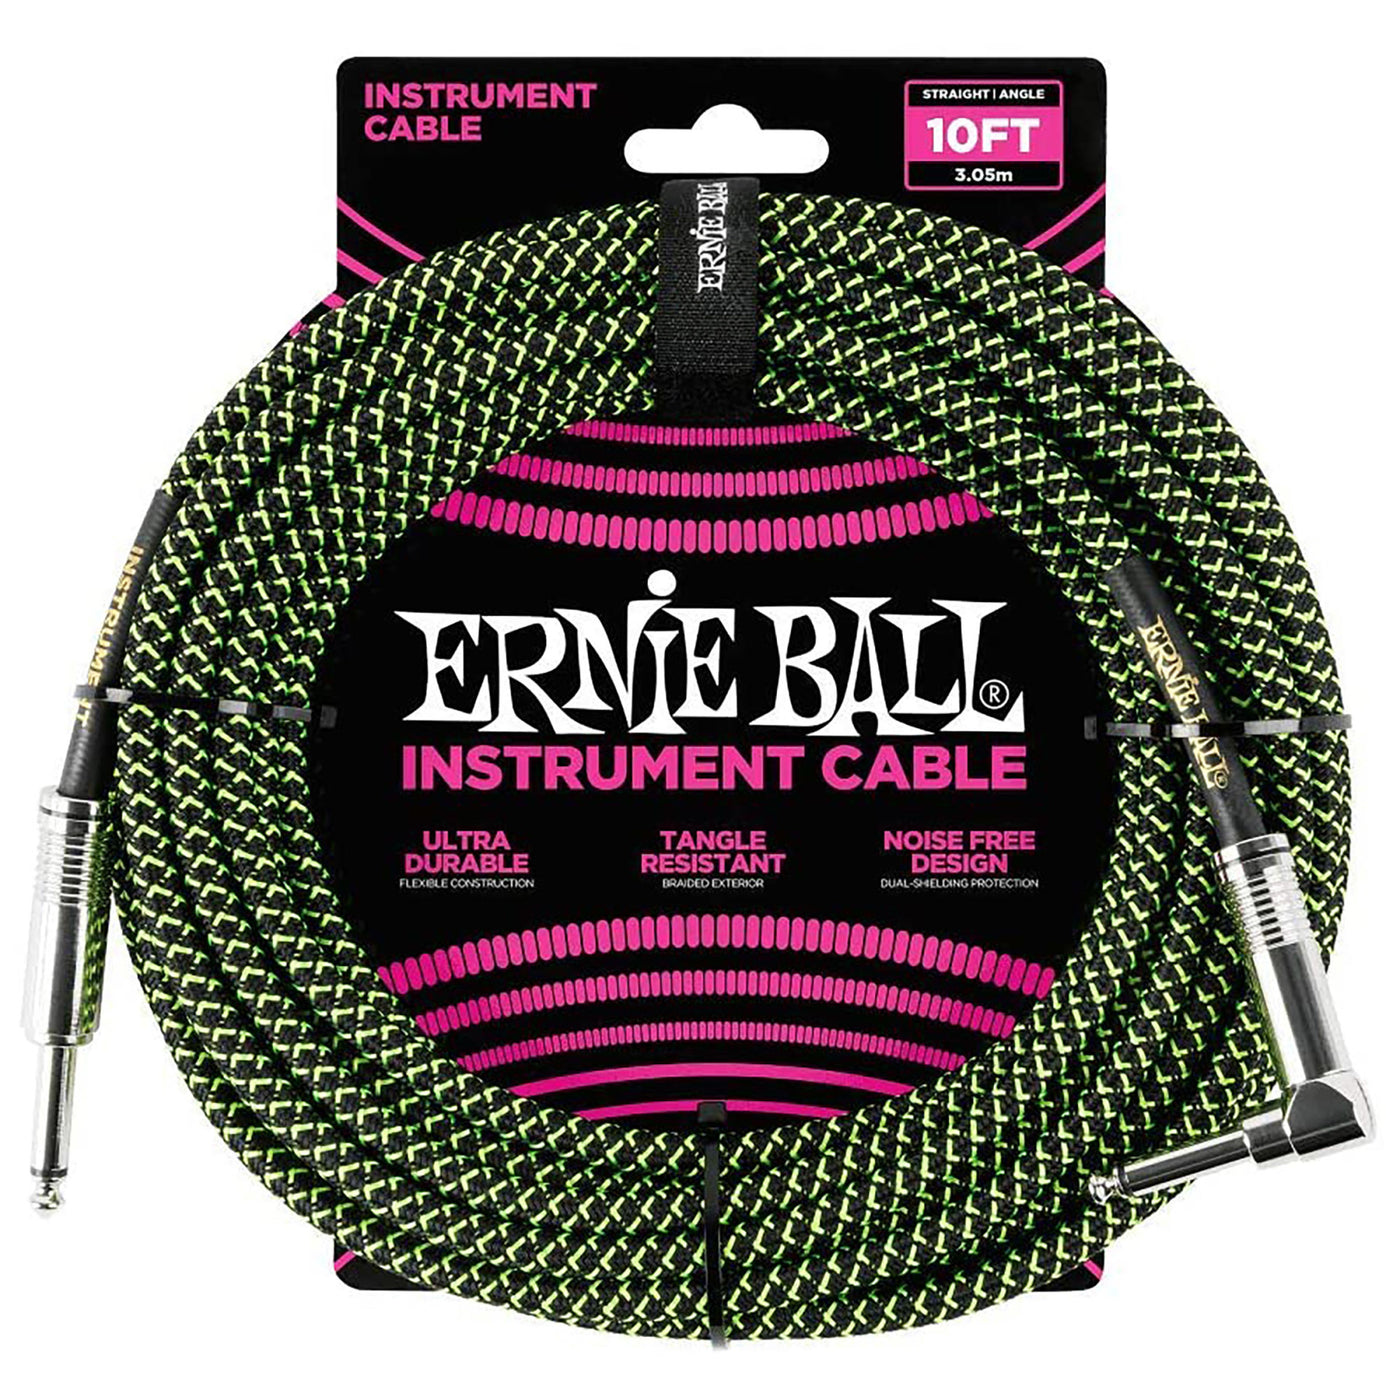 Ernie Ball 10' Braided Straight Angle Inst Cable Black Green